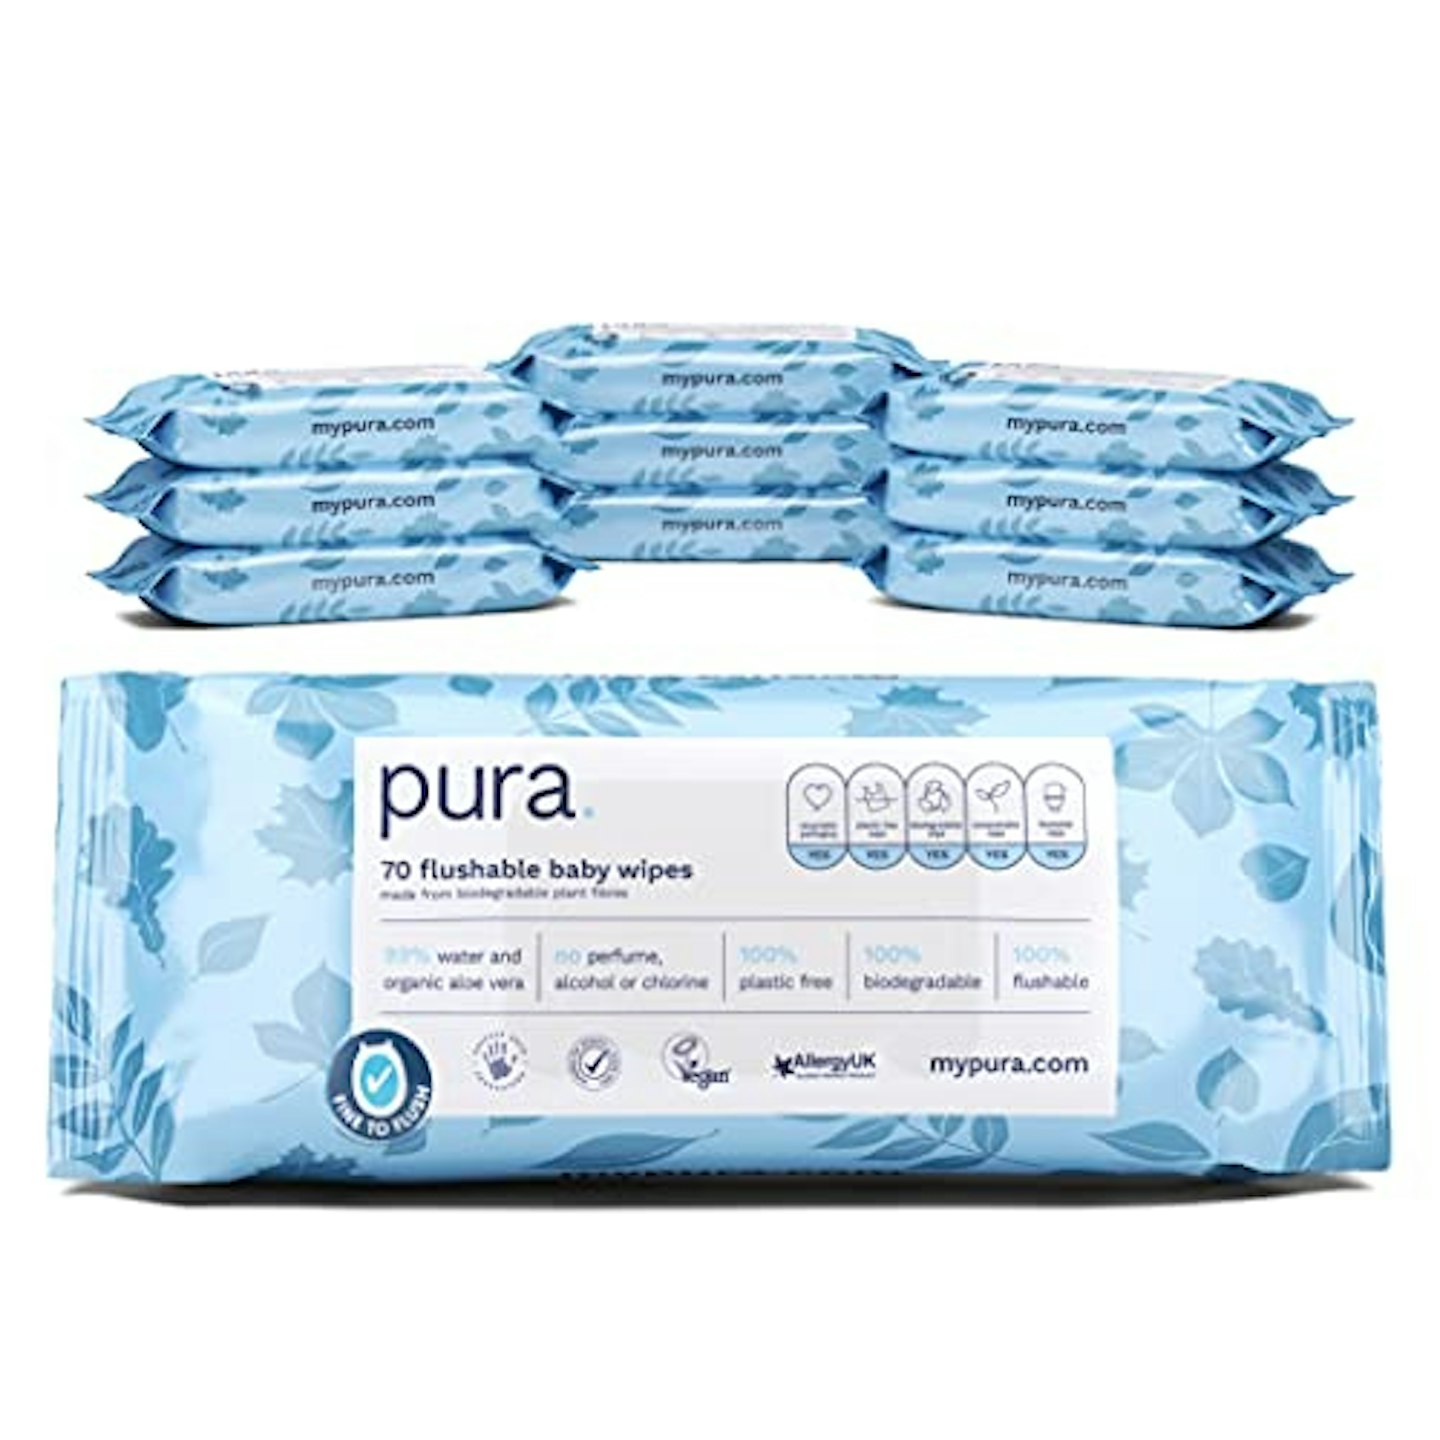 Pura Flushable Baby Wipes (10 Packs Of 70 Wipes, 700 Wipes)